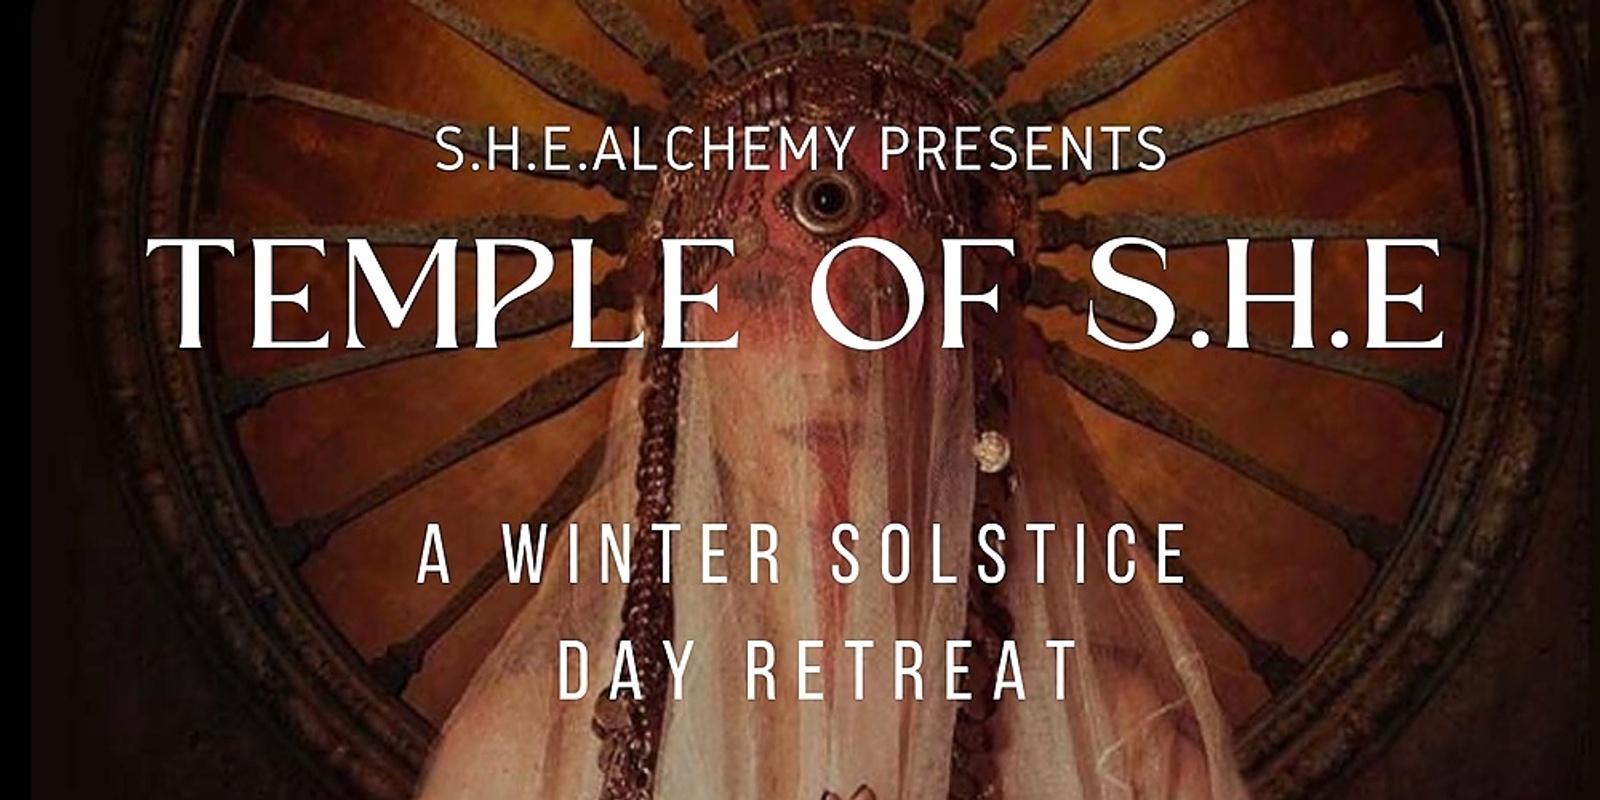 Banner image for TEMPLE OF S.H.E. DAY RETREAT